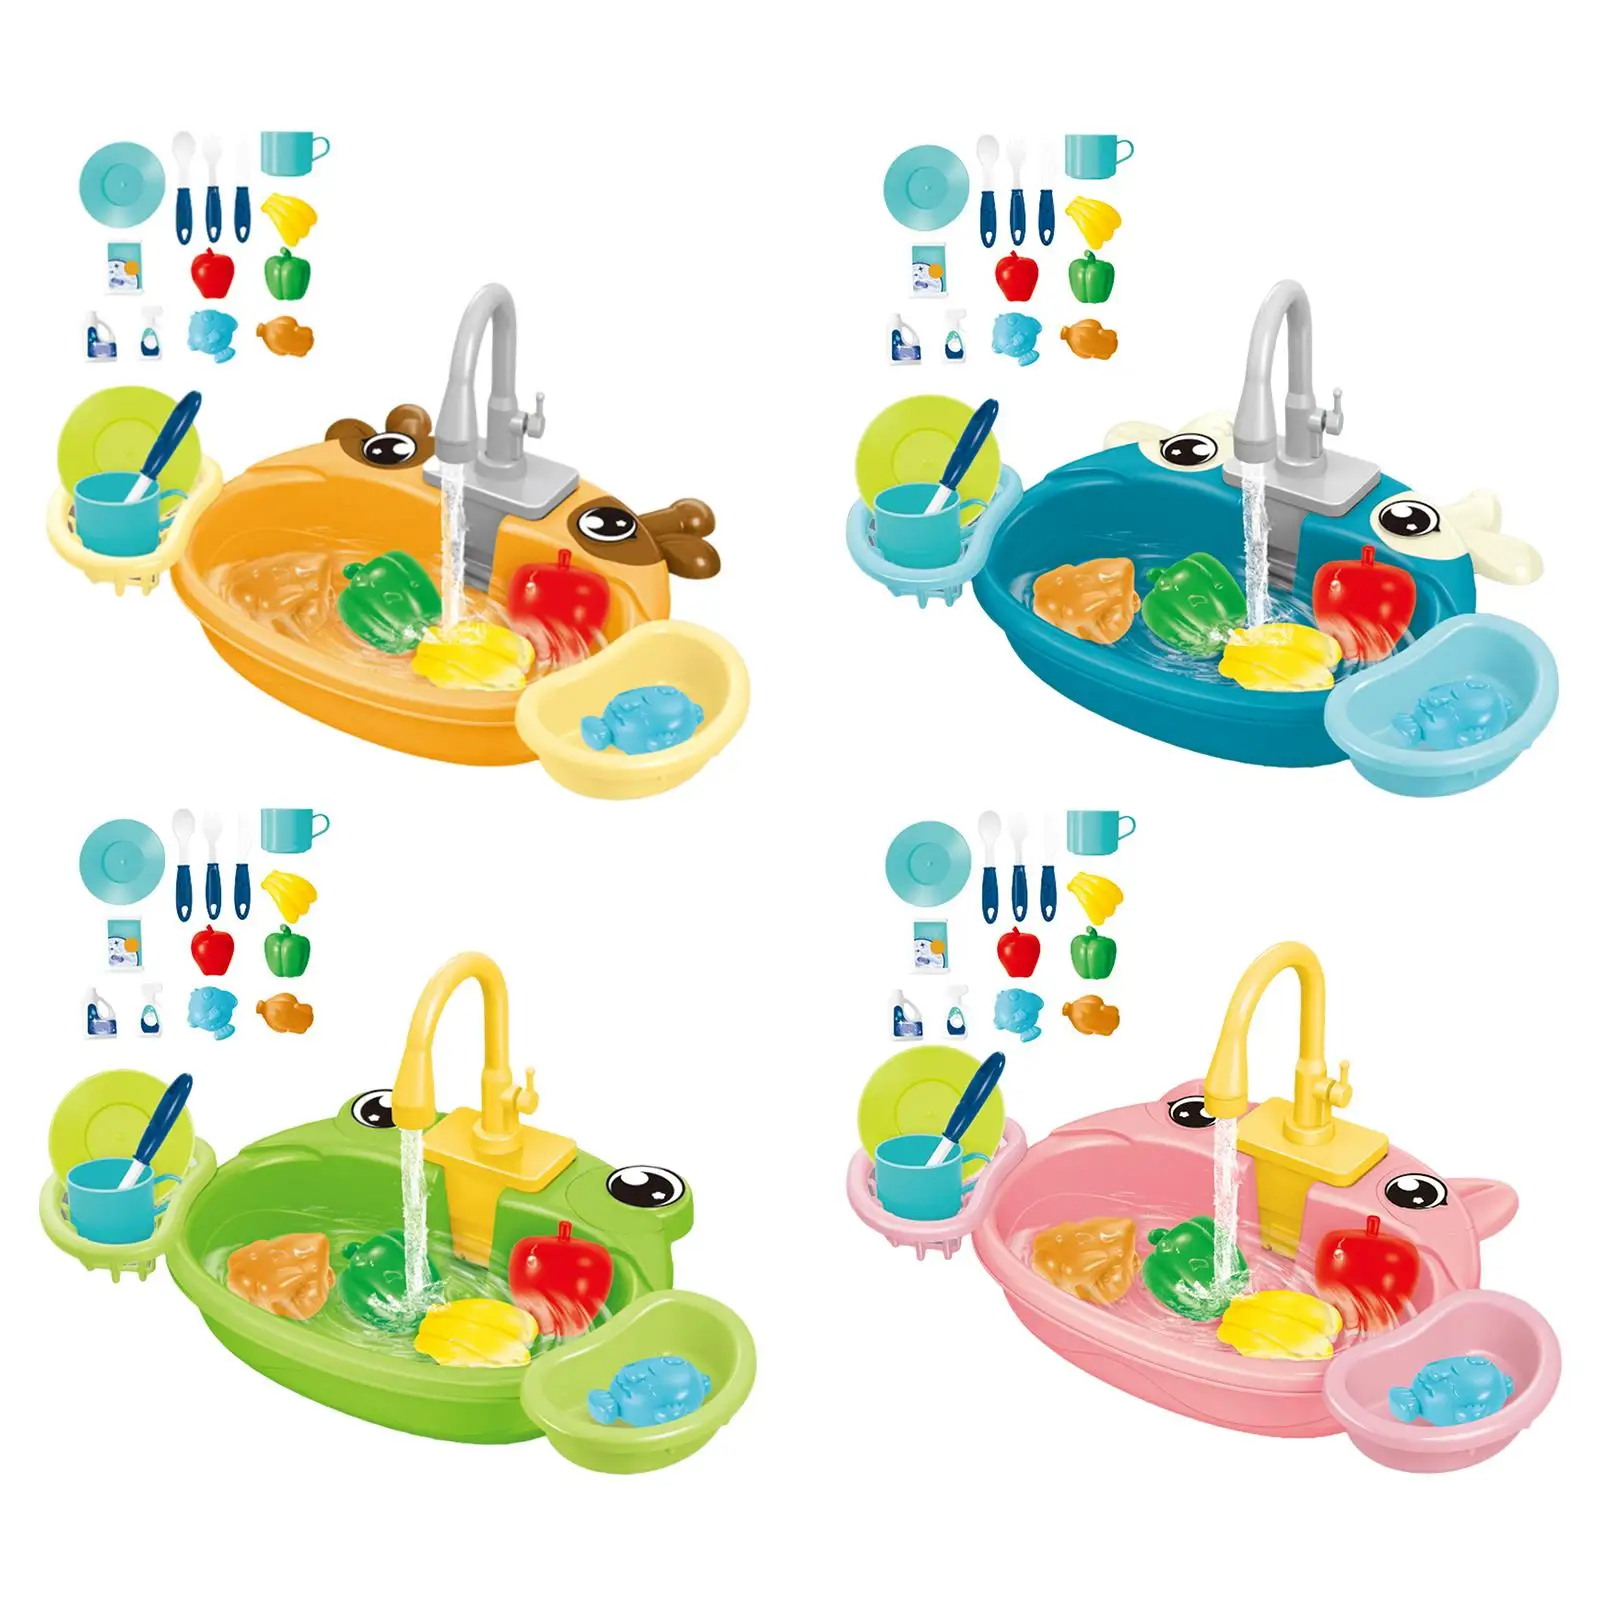 Kitchen Sink Toys Accessories with Running Water Plastic Pretend Cleaning Play Set for Kitchen Birthday